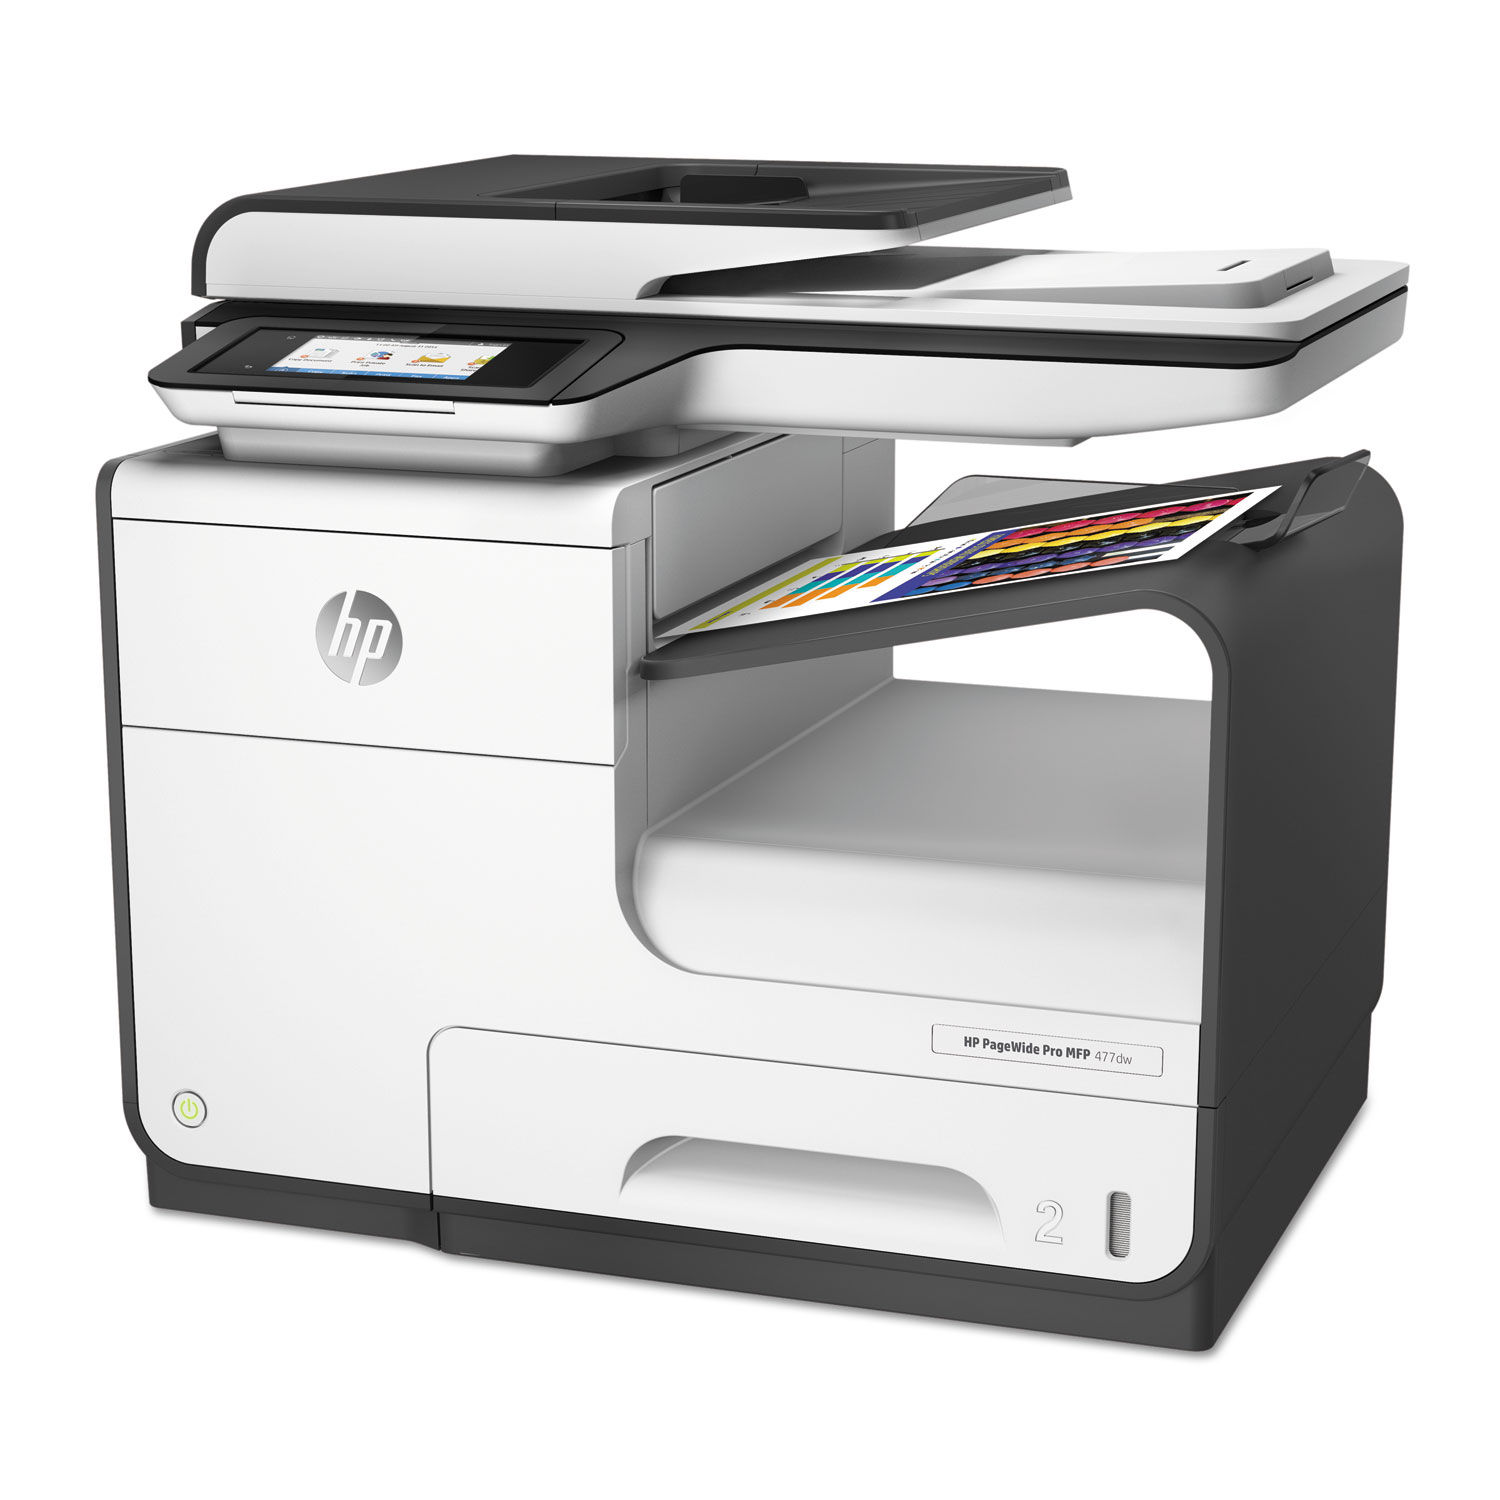 PageWide Pro 477dw Multifunction Printer by HP HEWD3Q20A OnTimeSupplies.com